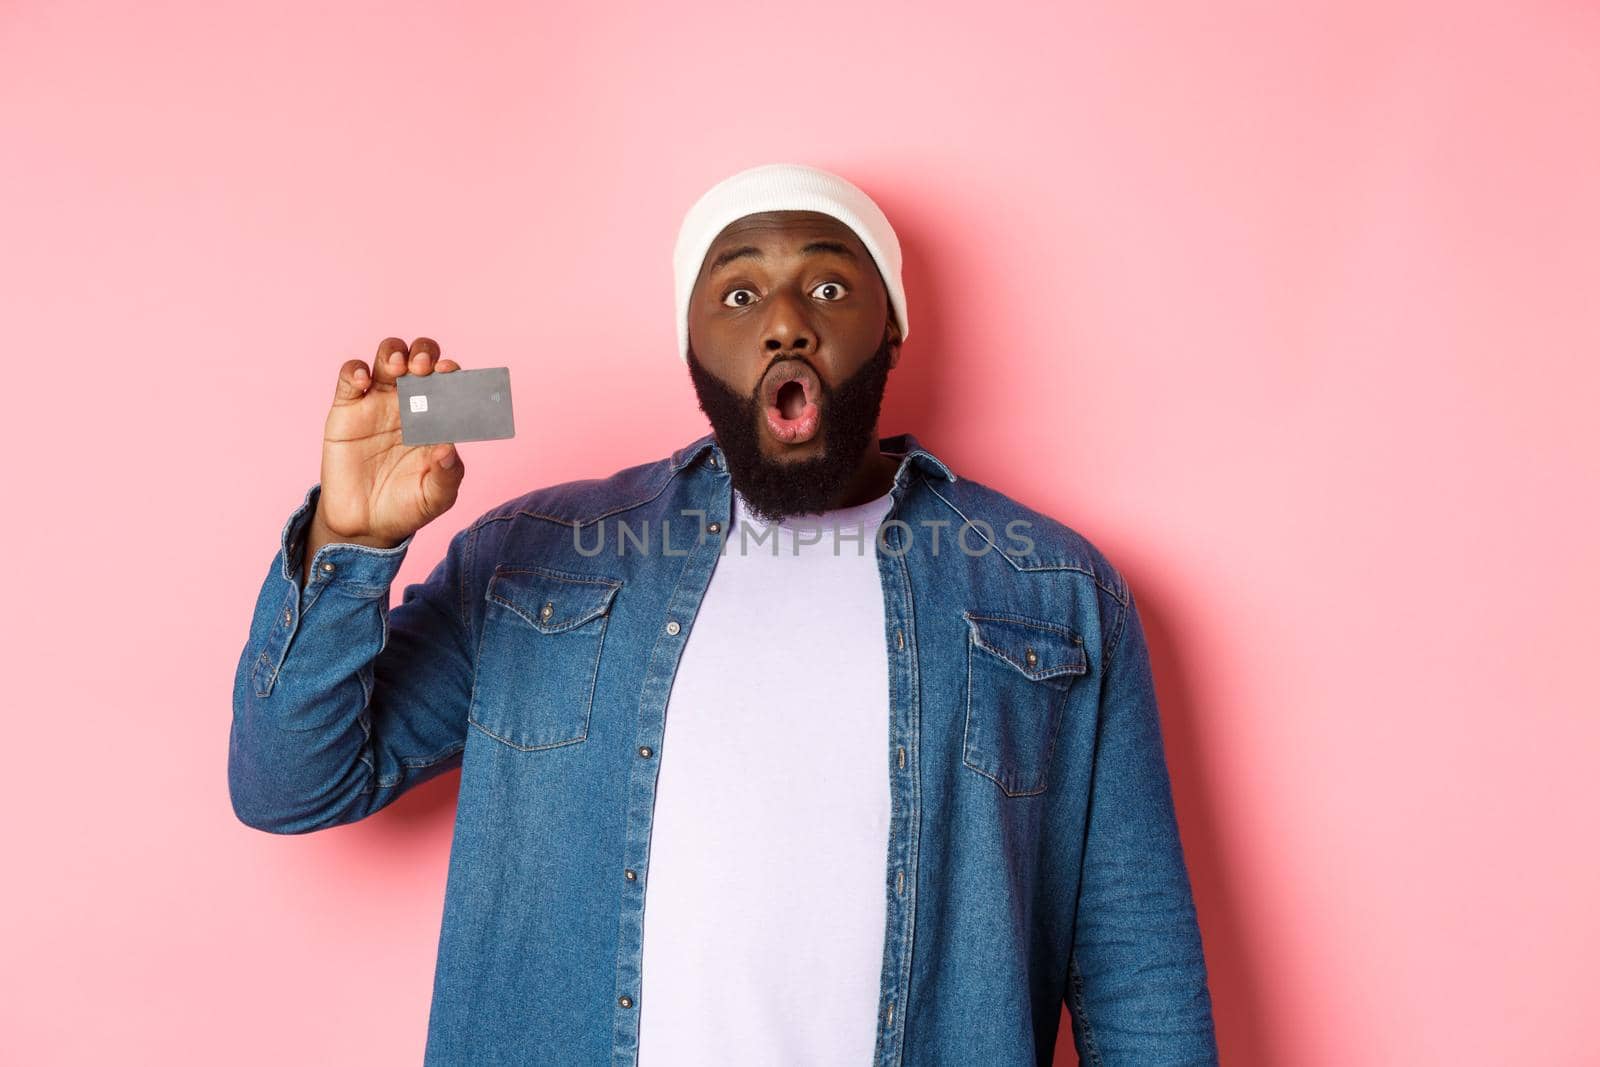 Shopping concept. Amazed Black guy showing credit card, staring at camera impressed, recommending bank, standing over pink background.